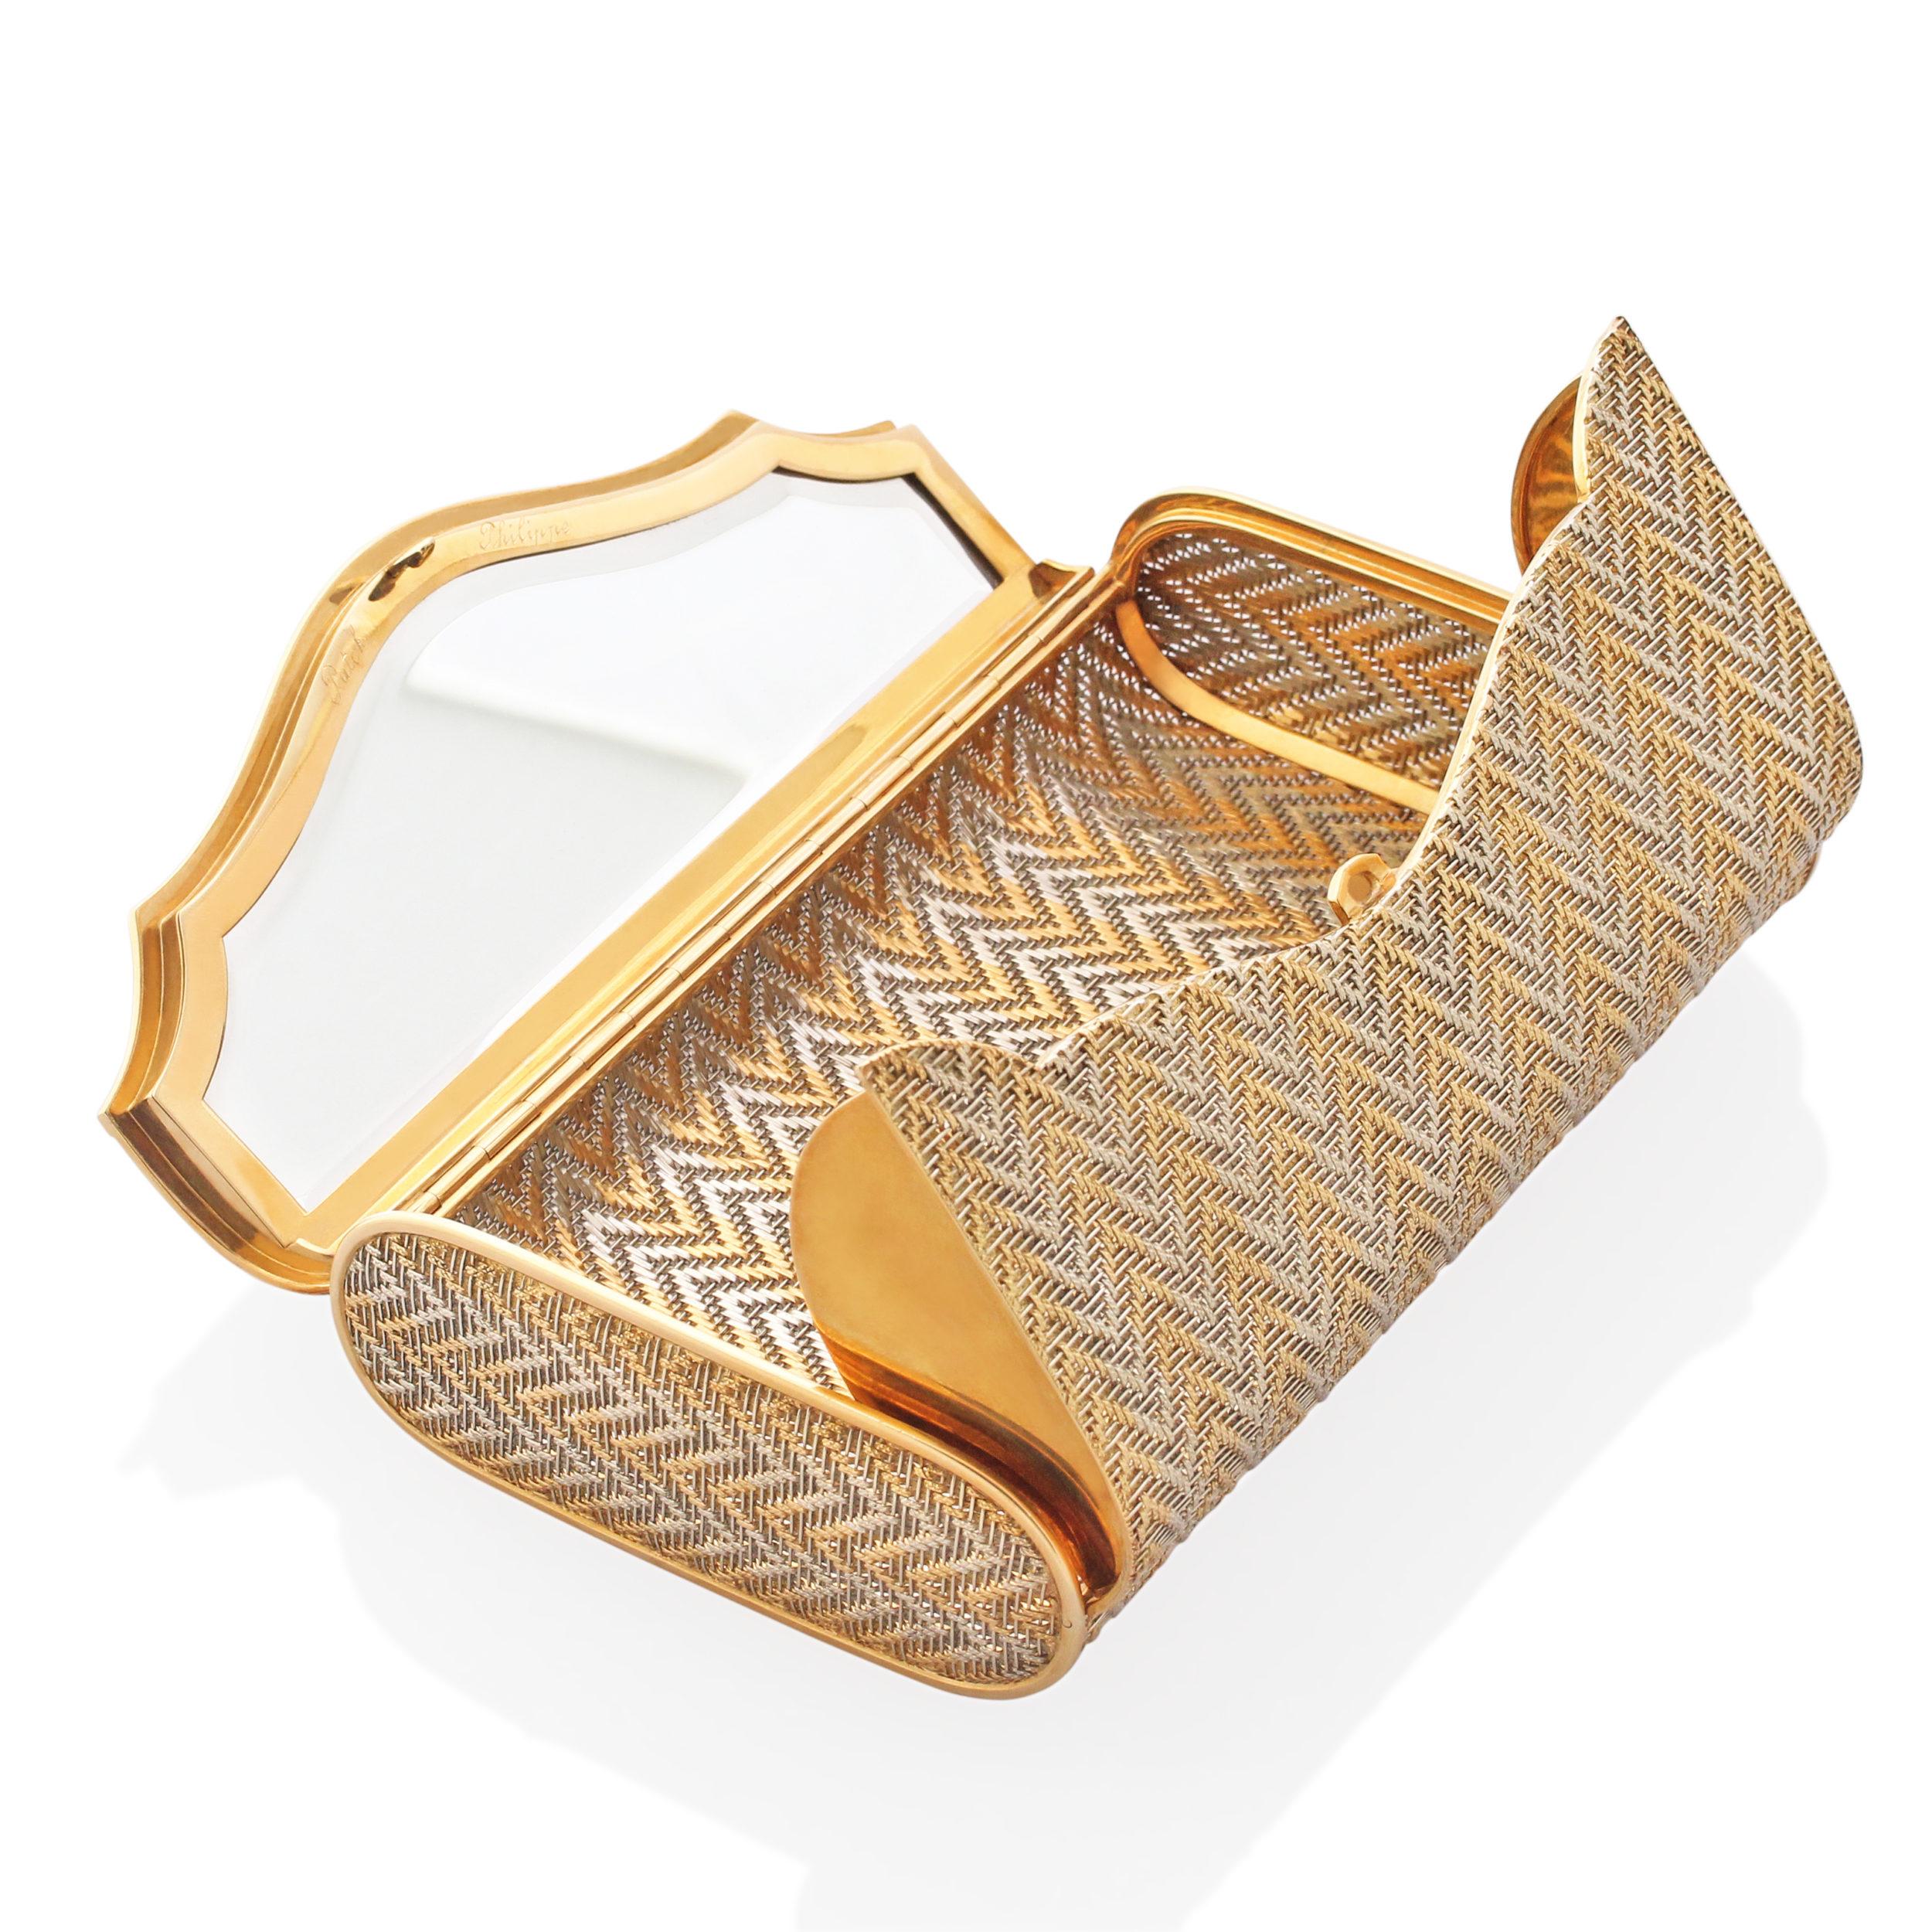 A gorgeous two tone gold clutch bag by Patek Philippe. Crafted from threads of 18k yellow and white gold woven together in an interchanging zigzag pattern to create this gorgeous light mesh evening bag. Compact enough to fit all your evening